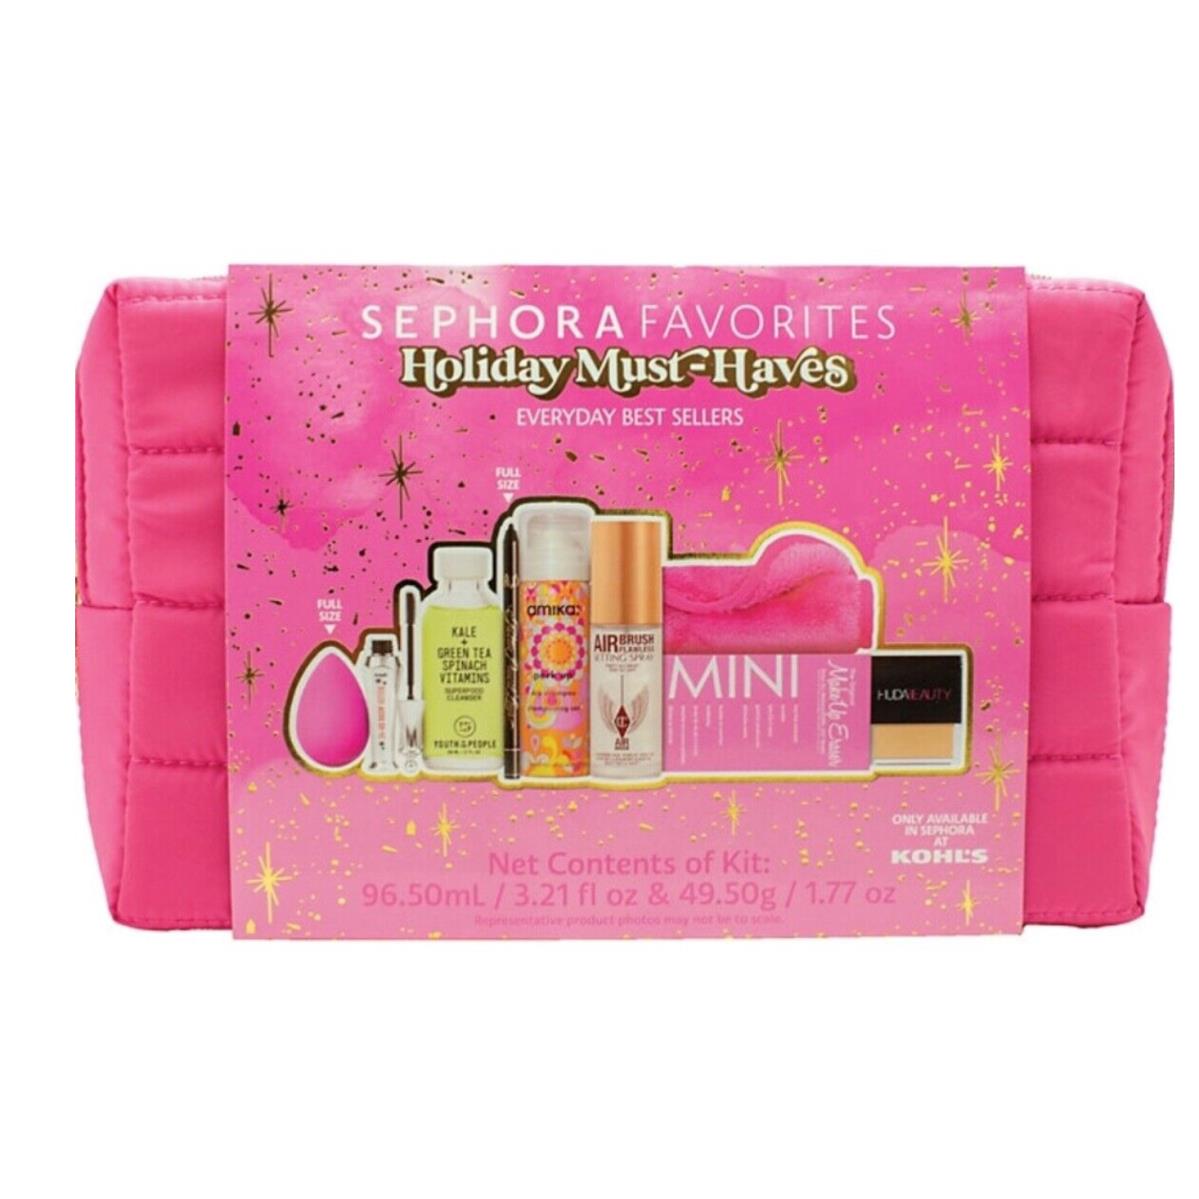 Sephora Favorites Holiday Must Haves 8 pc Gift Set in Barbie-pink Pouch Hot